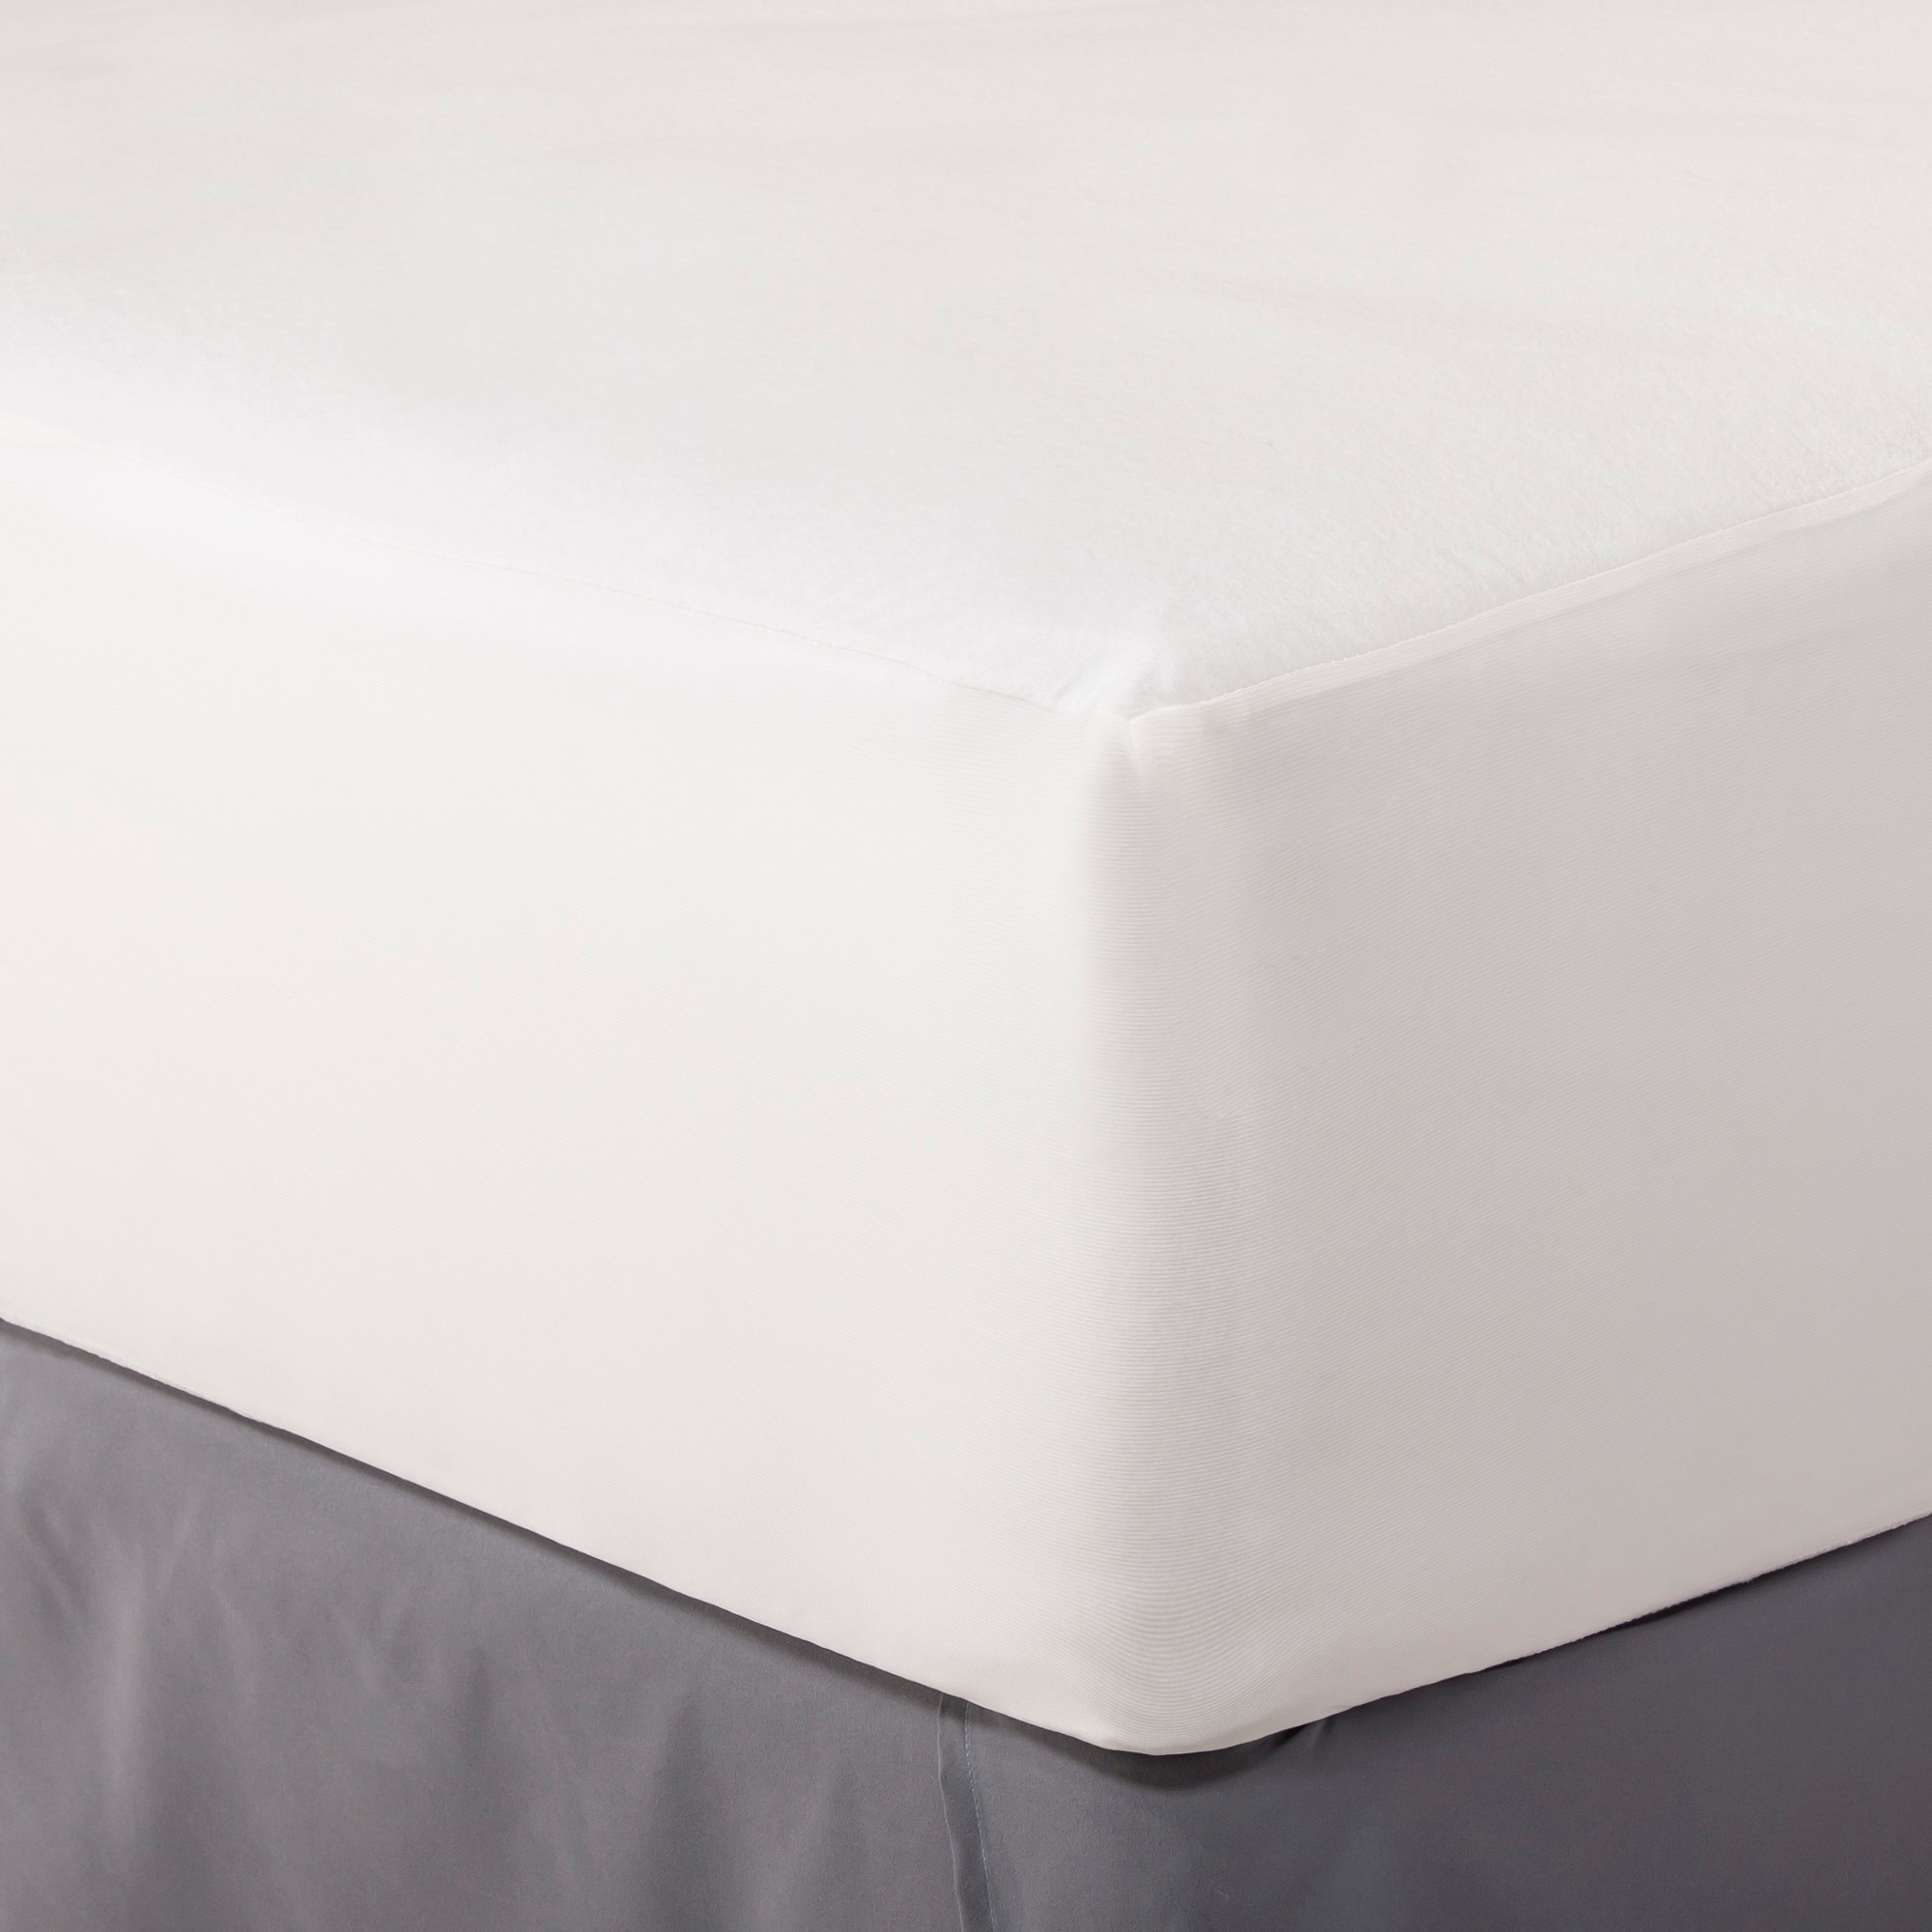 Mainstays Fitted Vinyl Waterproof Mattress Protector - image 3 of 4